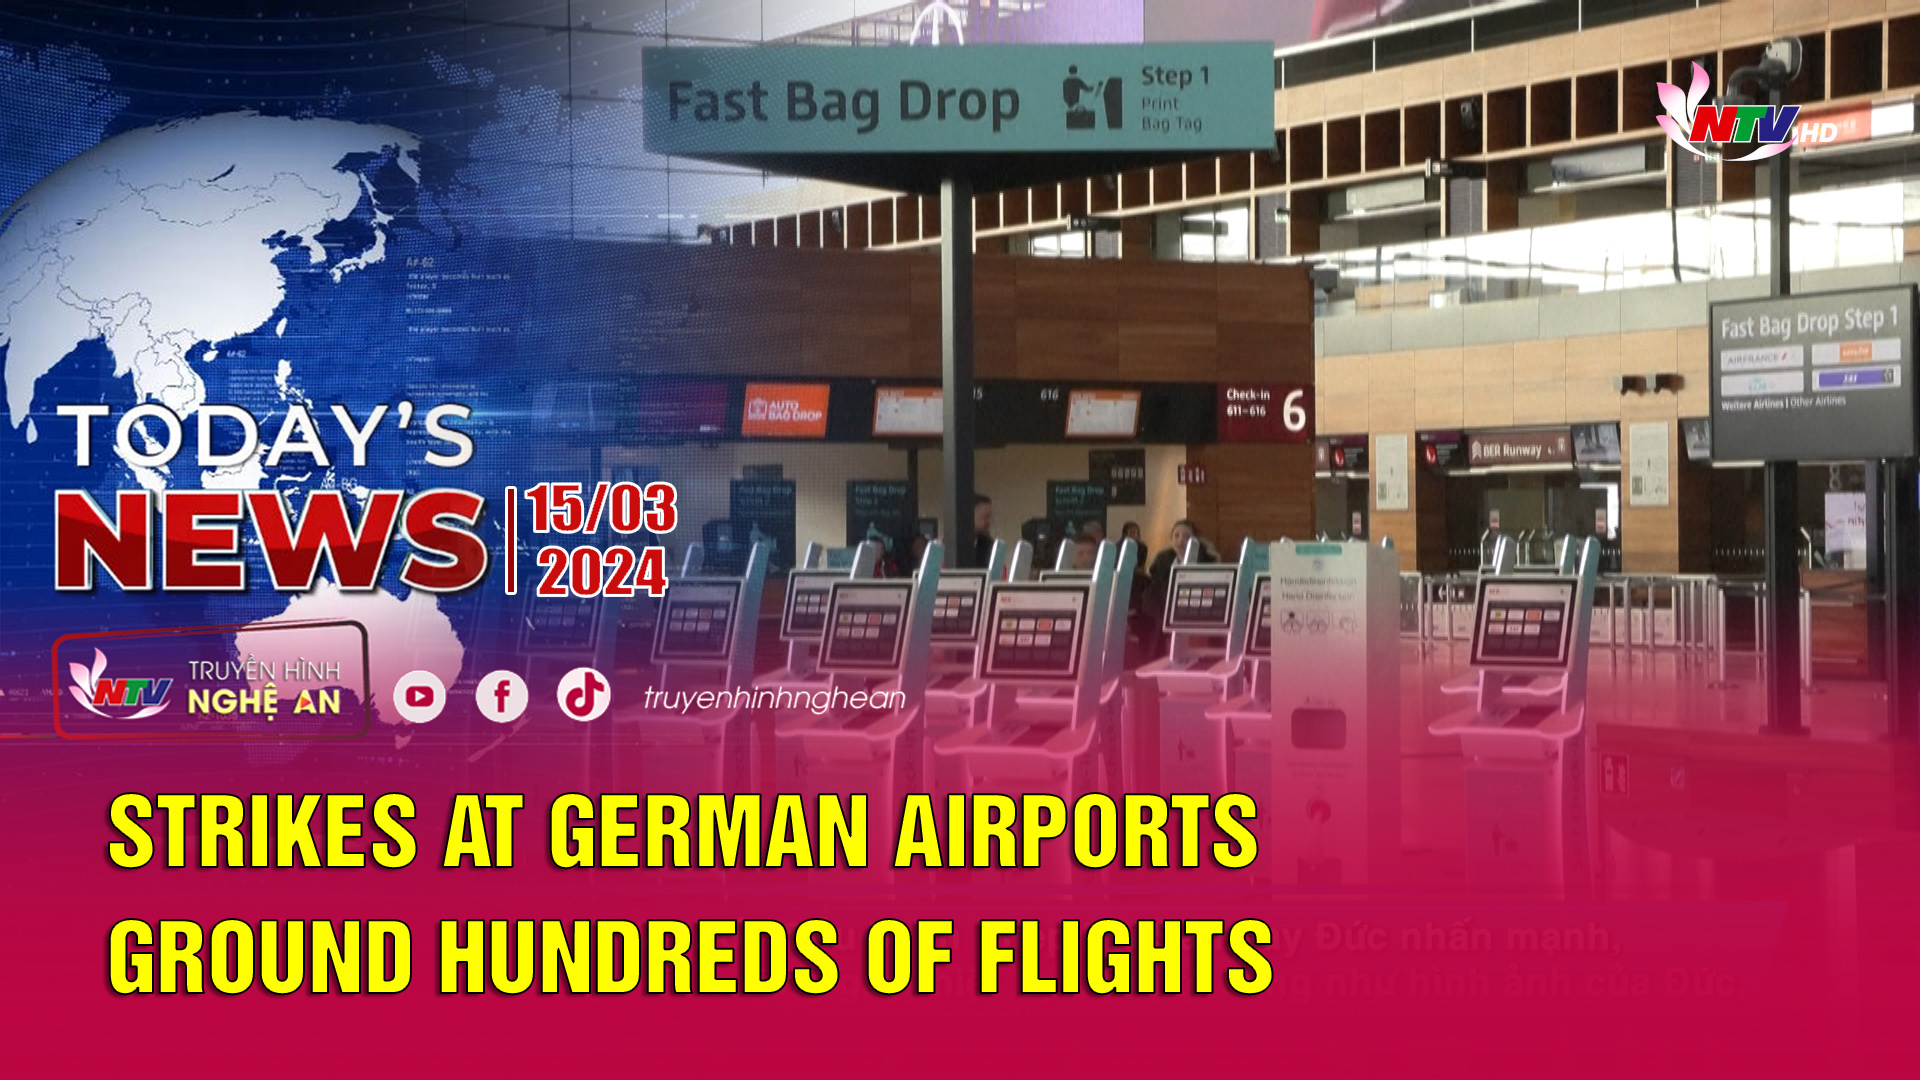 Today's News 15/03/2024: Strikes at German airports ground hundreds of flights